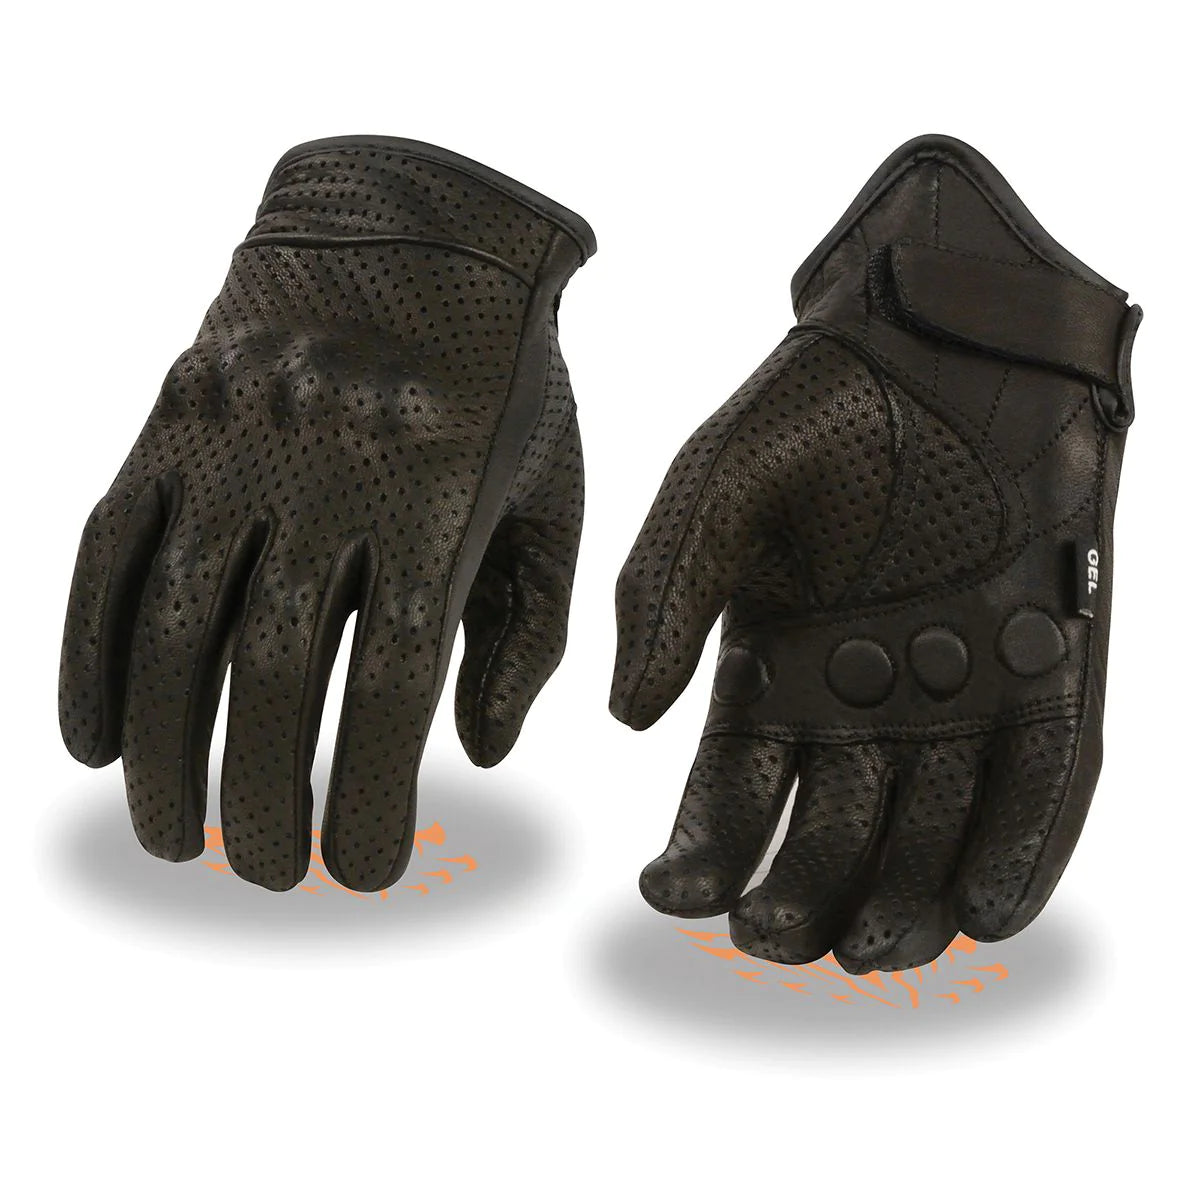 Men's Black Perforated Leather Gloves with Knuckle Protection